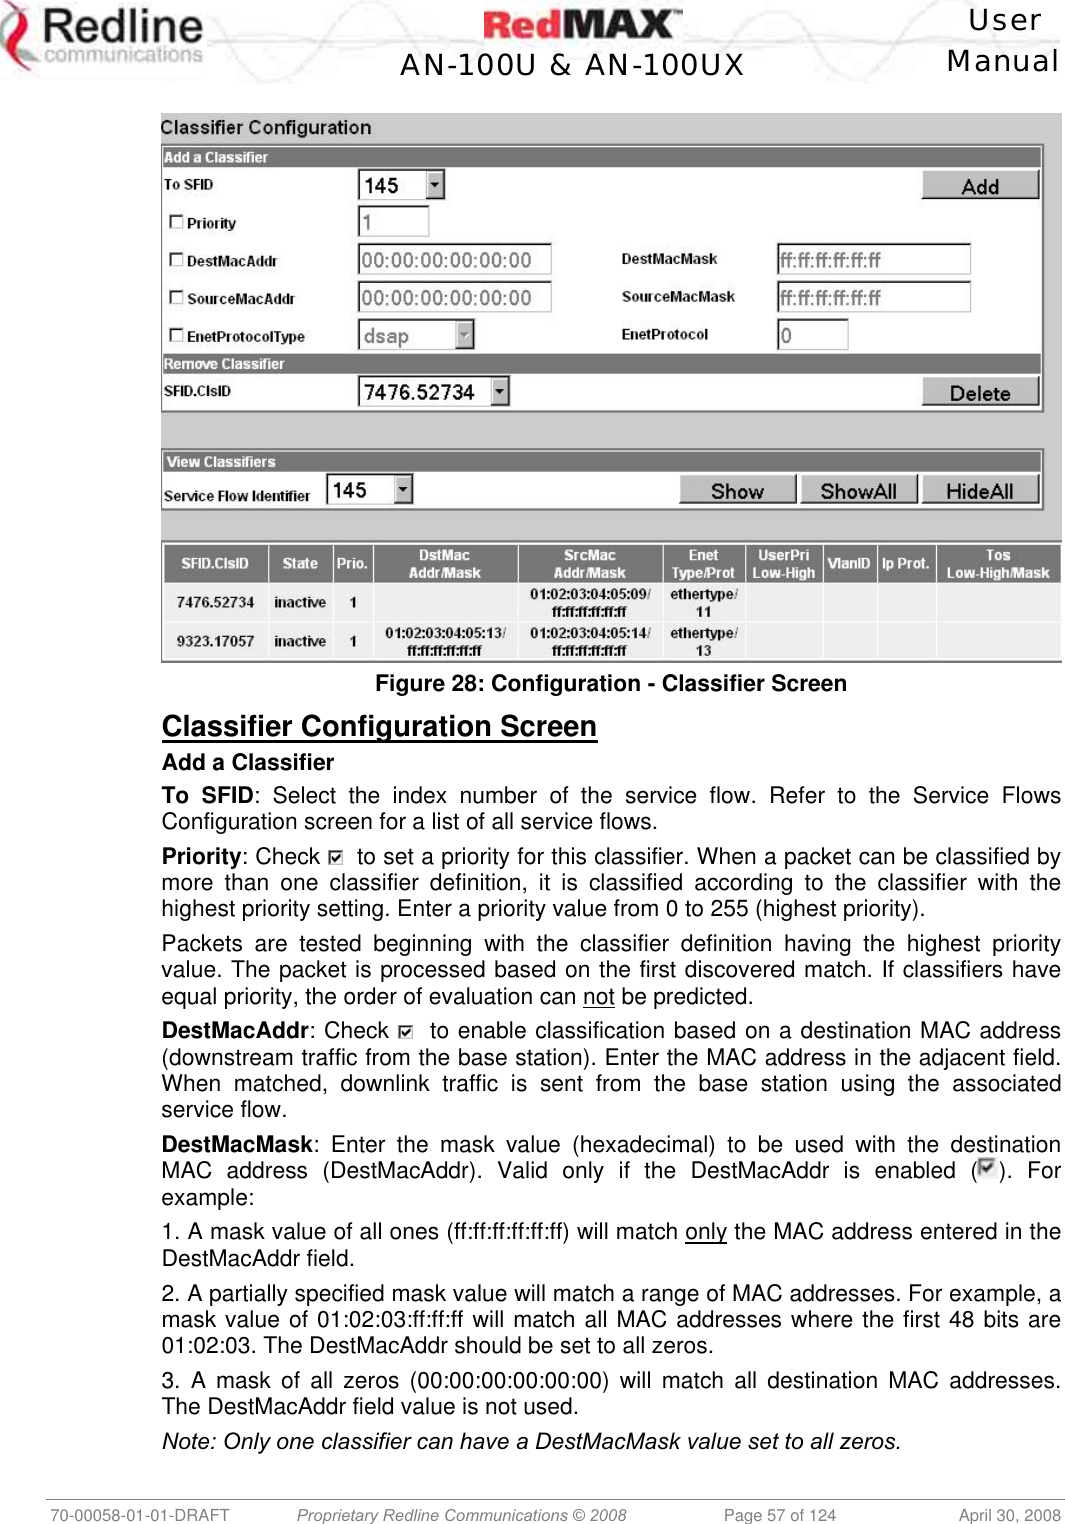    User  AN-100U &amp; AN-100UX Manual   70-00058-01-01-DRAFT  Proprietary Redline Communications © 2008   Page 57 of 124  April 30, 2008   Figure 28: Configuration - Classifier Screen  Classifier Configuration Screen Add a Classifier To SFID: Select the index number of the service flow. Refer to the Service Flows Configuration screen for a list of all service flows. Priority: Check    to set a priority for this classifier. When a packet can be classified by more than one classifier definition, it is classified according to the classifier with the highest priority setting. Enter a priority value from 0 to 255 (highest priority). Packets are tested beginning with the classifier definition having the highest priority value. The packet is processed based on the first discovered match. If classifiers have equal priority, the order of evaluation can not be predicted. DestMacAddr: Check    to enable classification based on a destination MAC address (downstream traffic from the base station). Enter the MAC address in the adjacent field. When matched, downlink traffic is sent from the base station using the associated service flow. DestMacMask: Enter the mask value (hexadecimal) to be used with the destination MAC address (DestMacAddr). Valid only if the DestMacAddr is enabled ( ). For example: 1. A mask value of all ones (ff:ff:ff:ff:ff:ff) will match only the MAC address entered in the DestMacAddr field.  2. A partially specified mask value will match a range of MAC addresses. For example, a mask value of 01:02:03:ff:ff:ff will match all MAC addresses where the first 48 bits are 01:02:03. The DestMacAddr should be set to all zeros. 3. A mask of all zeros (00:00:00:00:00:00) will match all destination MAC addresses. The DestMacAddr field value is not used.  Note: Only one classifier can have a DestMacMask value set to all zeros. 